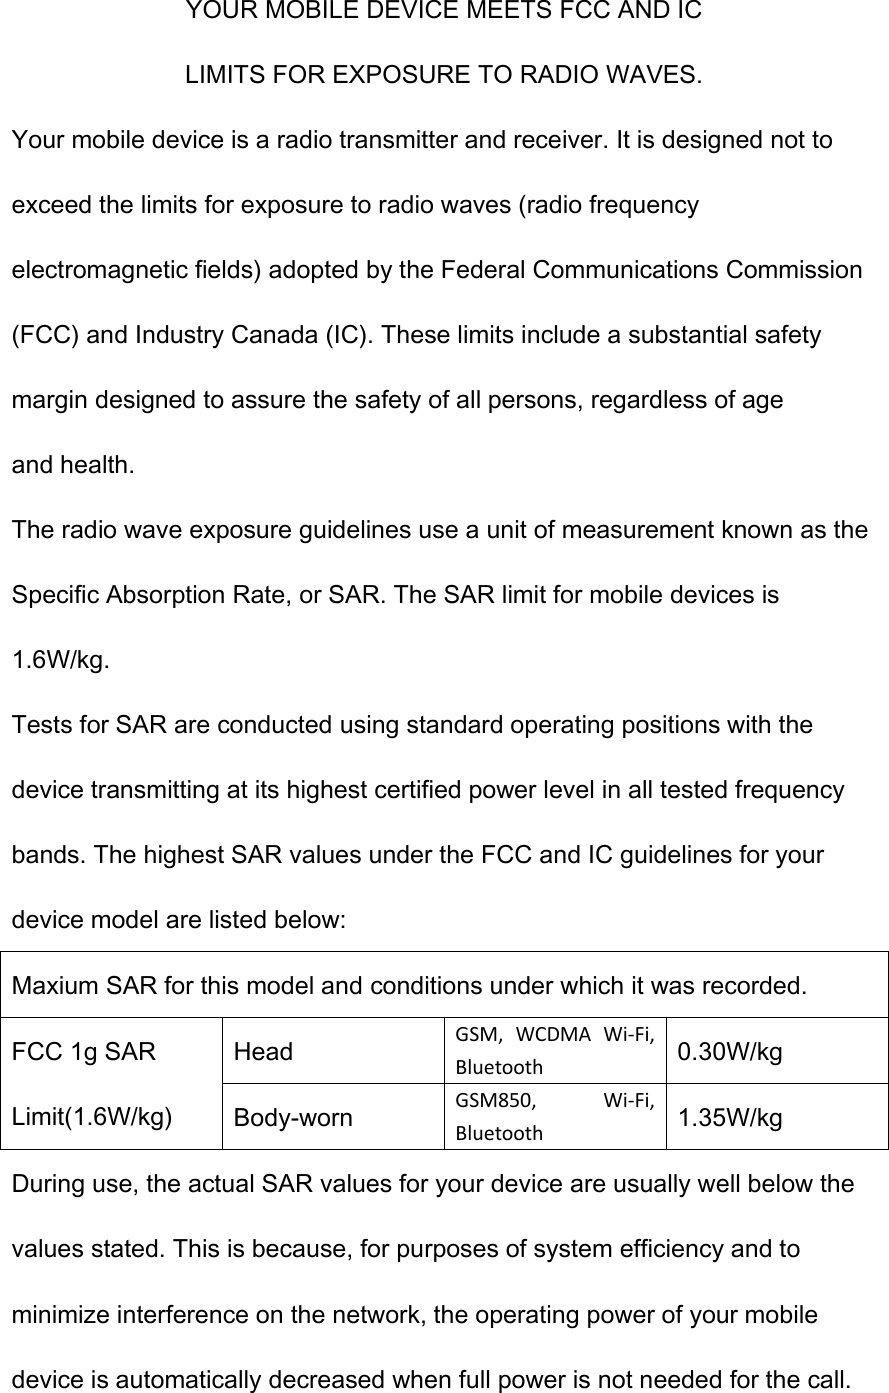 YOUR MOBILE DEVICE MEETS FCC AND IC LIMITS FOR EXPOSURE TO RADIO WAVES. Your mobile device is a radio transmitter and receiver. It is designed not to exceed the limits for exposure to radio waves (radio frequency electromagnetic fields) adopted by the Federal Communications Commission (FCC) and Industry Canada (IC). These limits include a substantial safety margin designed to assure the safety of all persons, regardless of age and health. The radio wave exposure guidelines use a unit of measurement known as the Specific Absorption Rate, or SAR. The SAR limit for mobile devices is 1.6W/kg. Tests for SAR are conducted using standard operating positions with the device transmitting at its highest certified power level in all tested frequency bands. The highest SAR values under the FCC and IC guidelines for your device model are listed below: Maxium SAR for this model and conditions under which it was recorded. FCC 1g SAR Limit(1.6W/kg) Head GSM,  WCDMA  Wi-Fi, Bluetooth 0.30W/kg Body-worn GSM850,  Wi-Fi, Bluetooth 1.35W/kg During use, the actual SAR values for your device are usually well below the values stated. This is because, for purposes of system efficiency and to minimize interference on the network, the operating power of your mobile device is automatically decreased when full power is not needed for the call. 